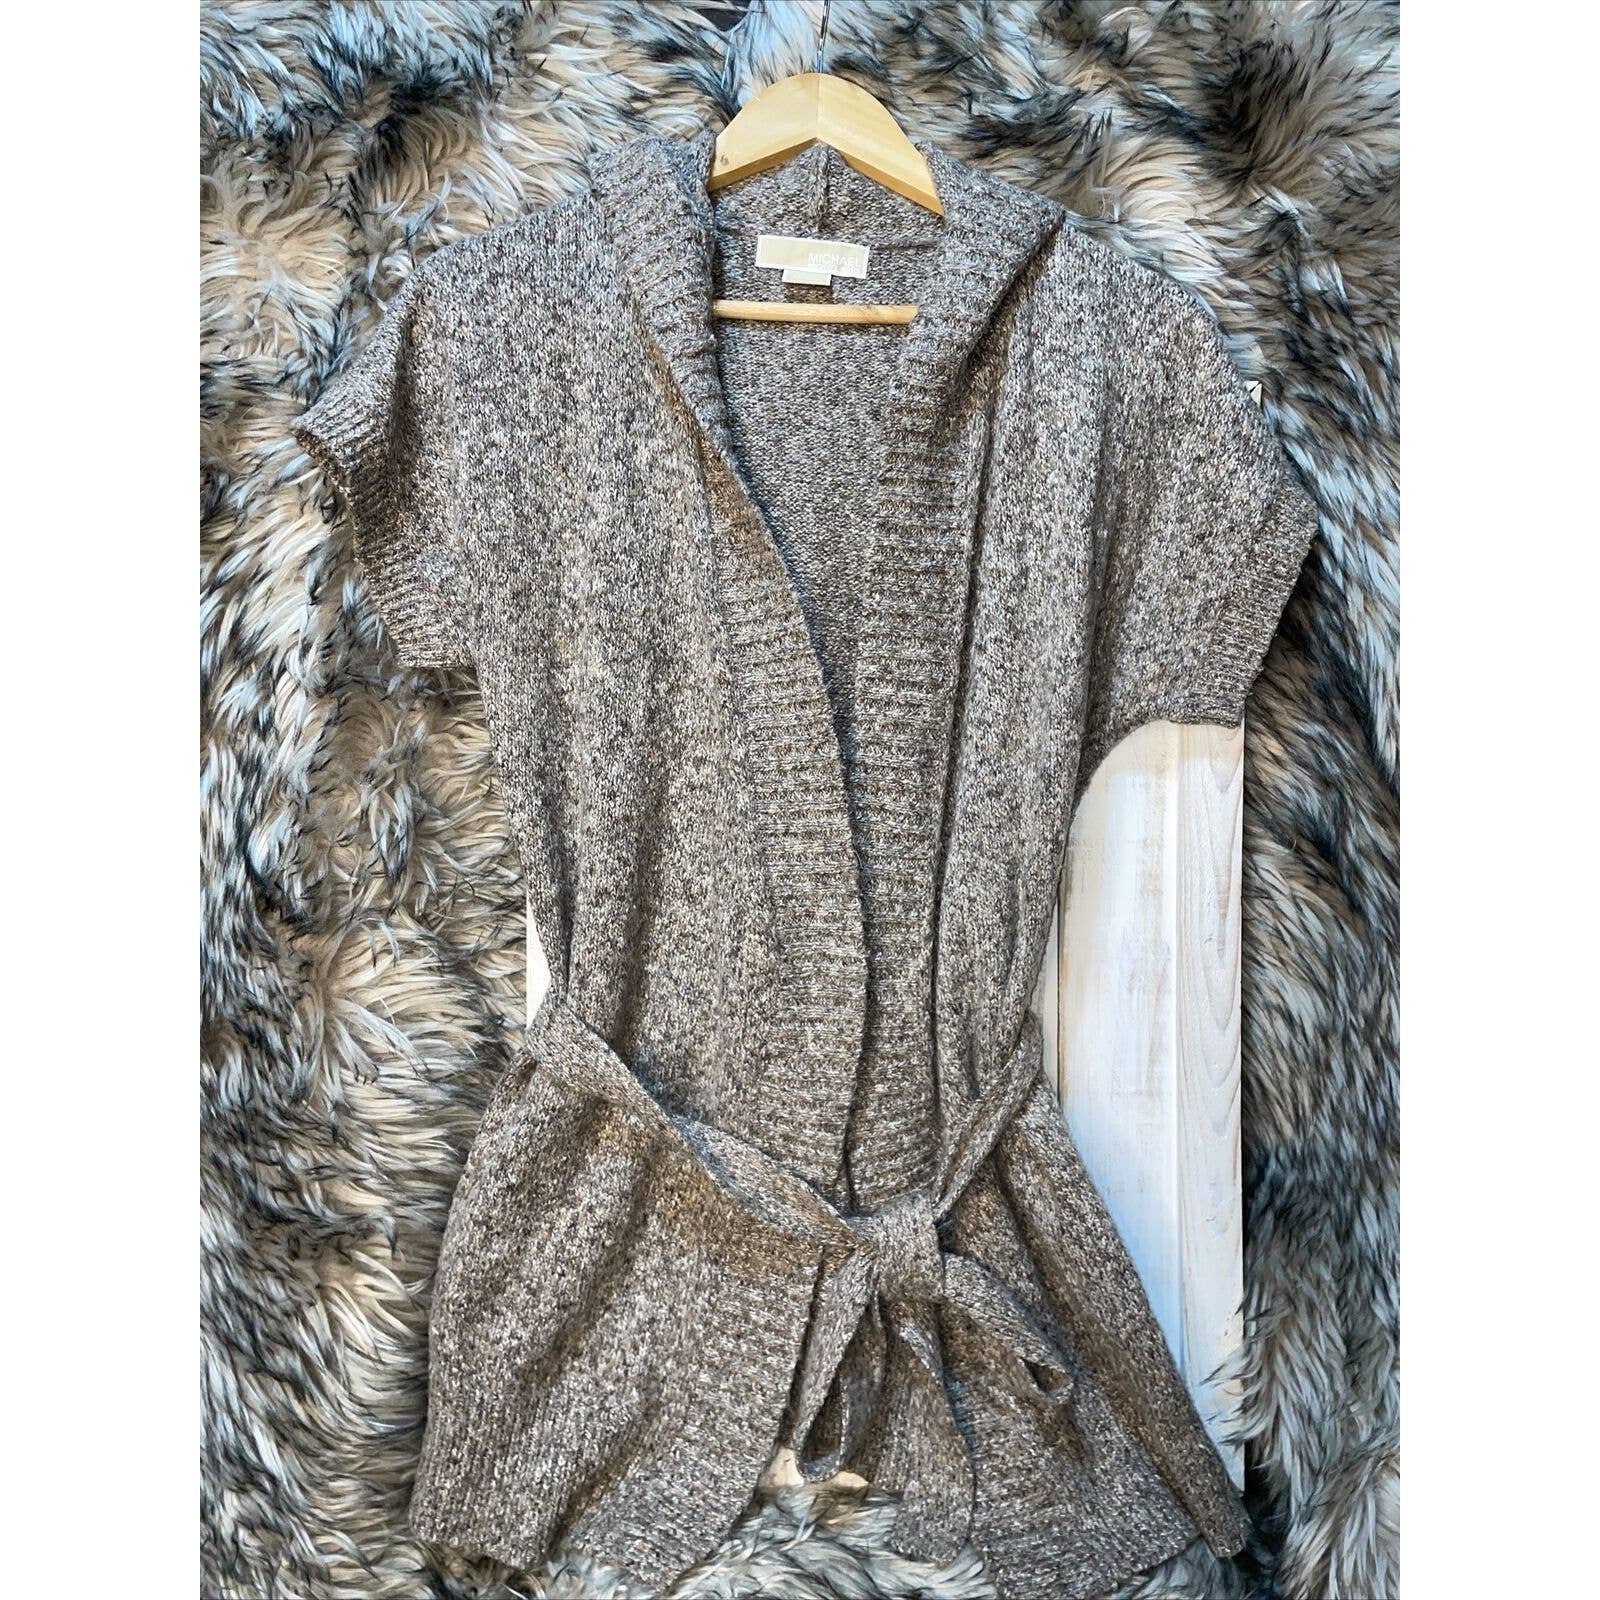 cheapest place to buy  Michael Kors Short Sleeve Hooded Natural Belted Cardigan Knit Sweater Women´s M ojXgRQEMg Wholesale